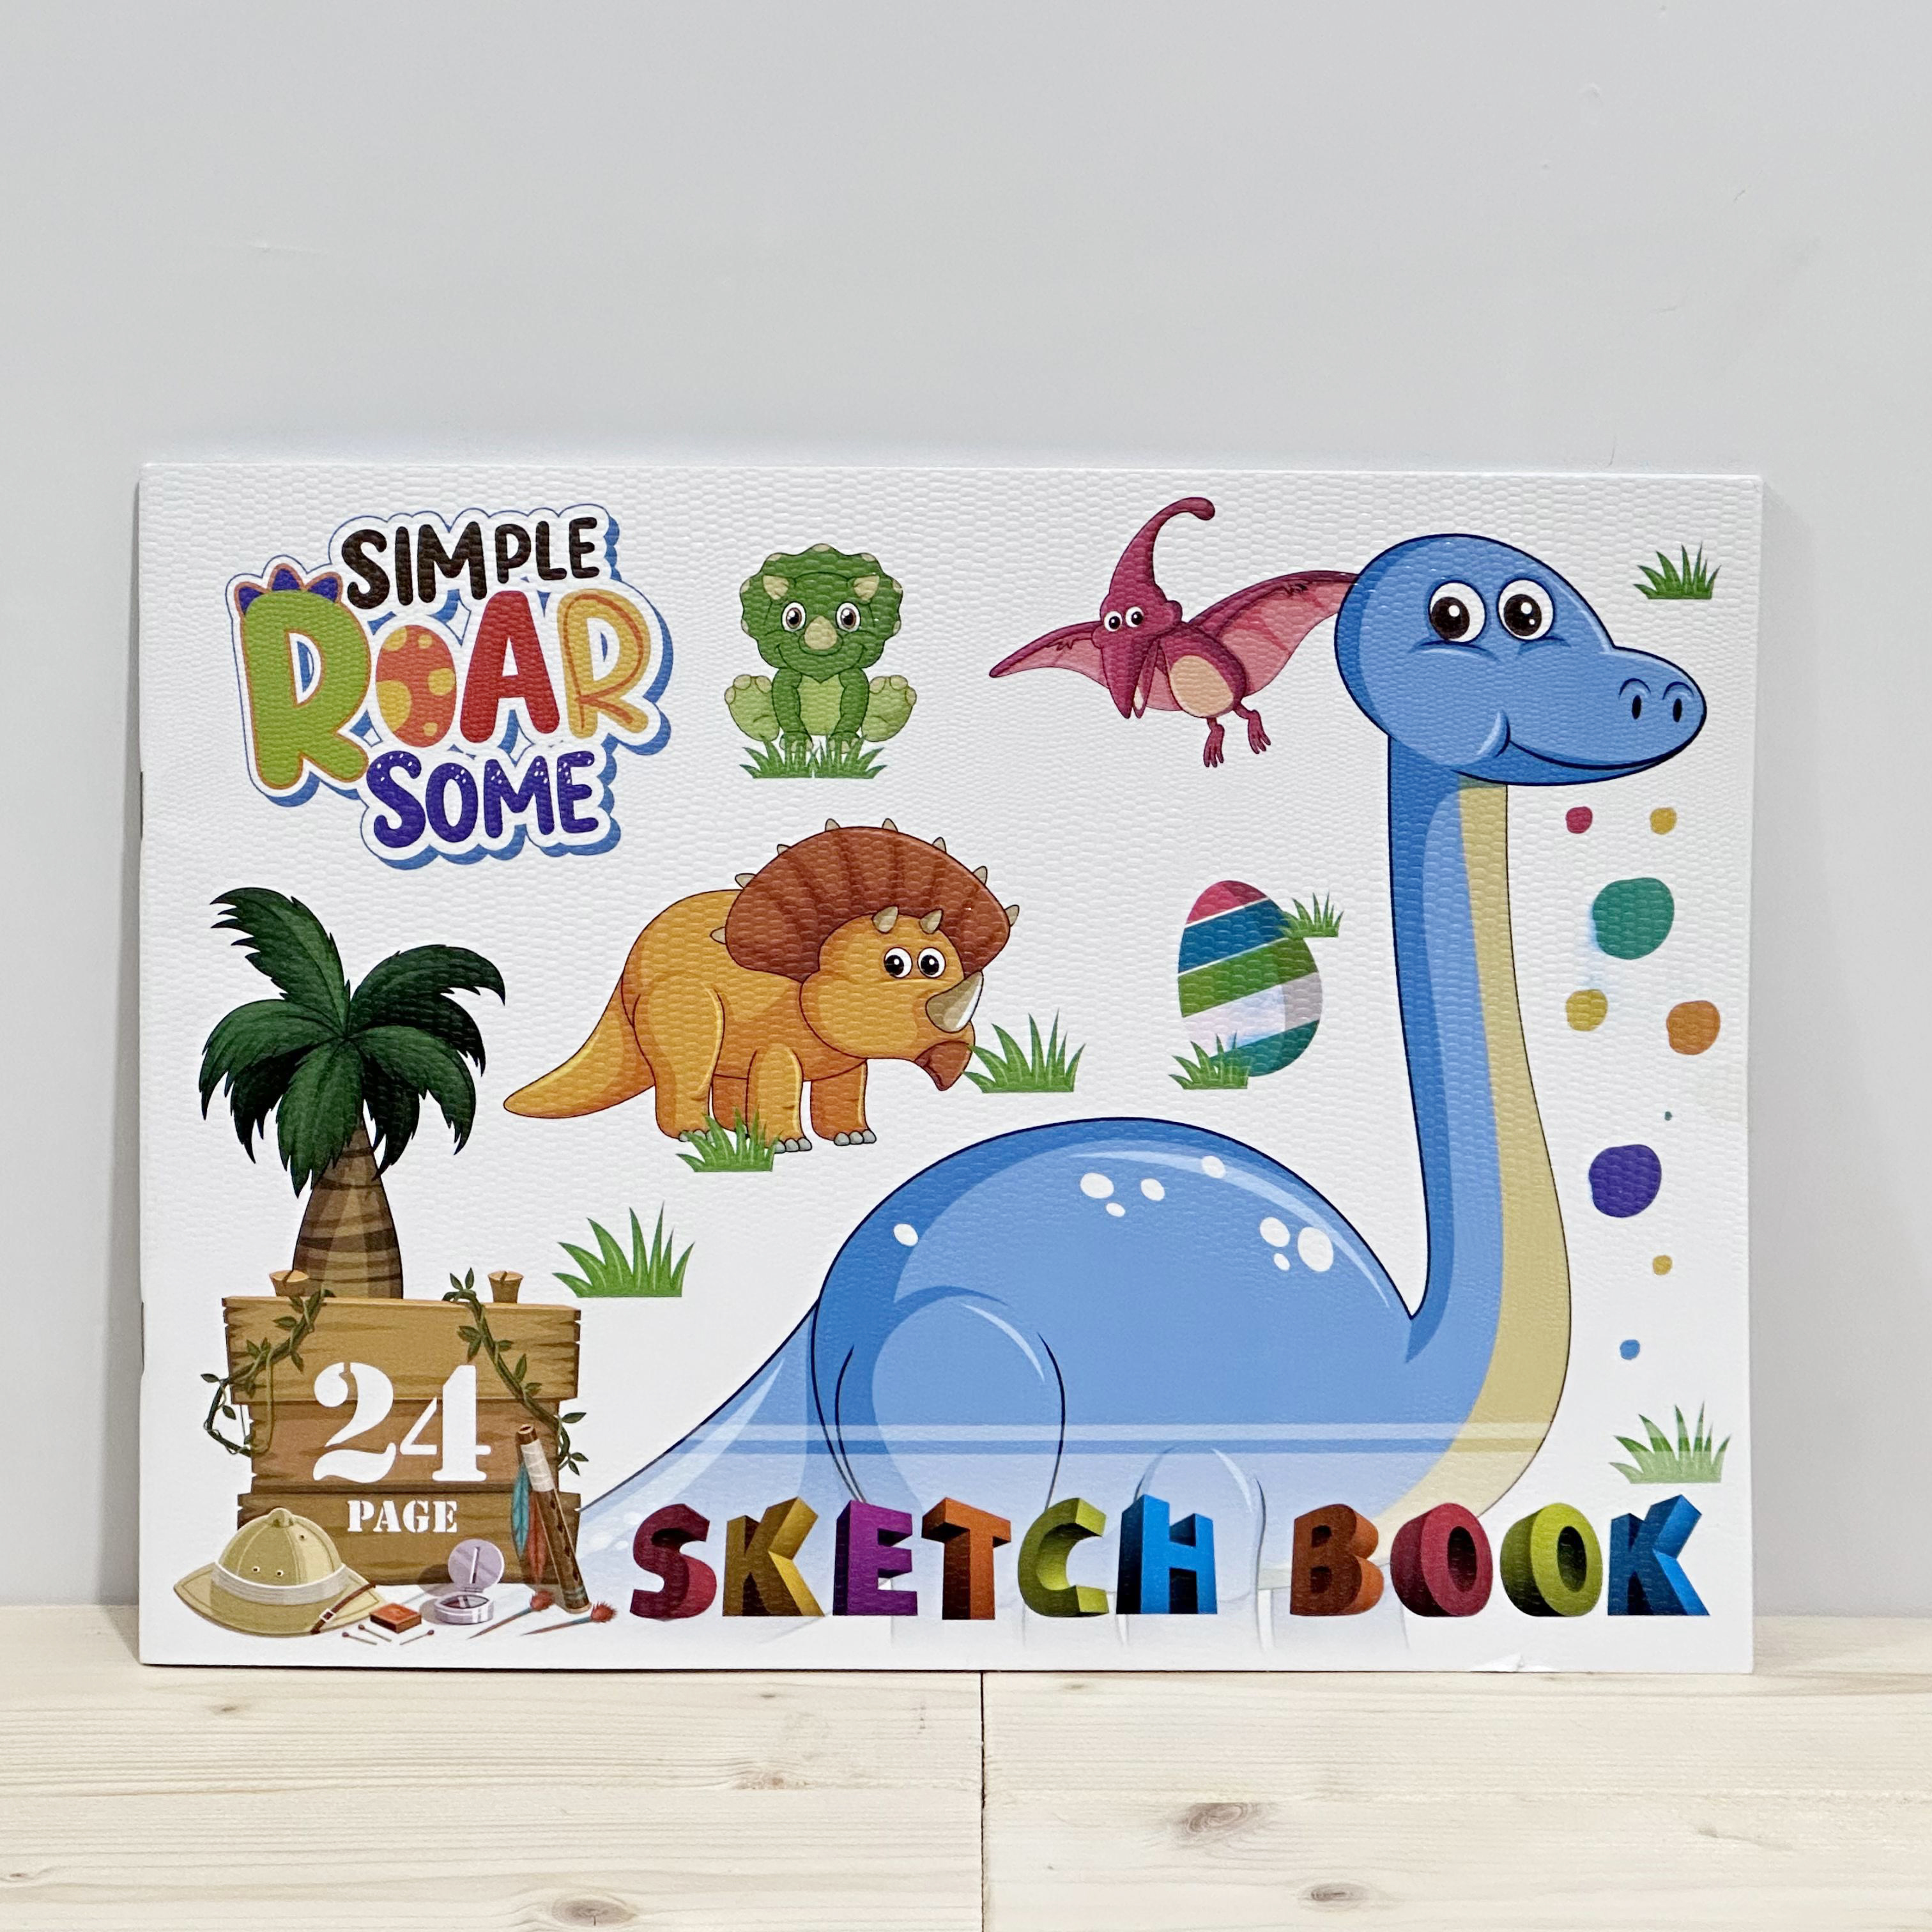 Cartoon A4 Sketchbook For Students - Blank White Paper For Drawing